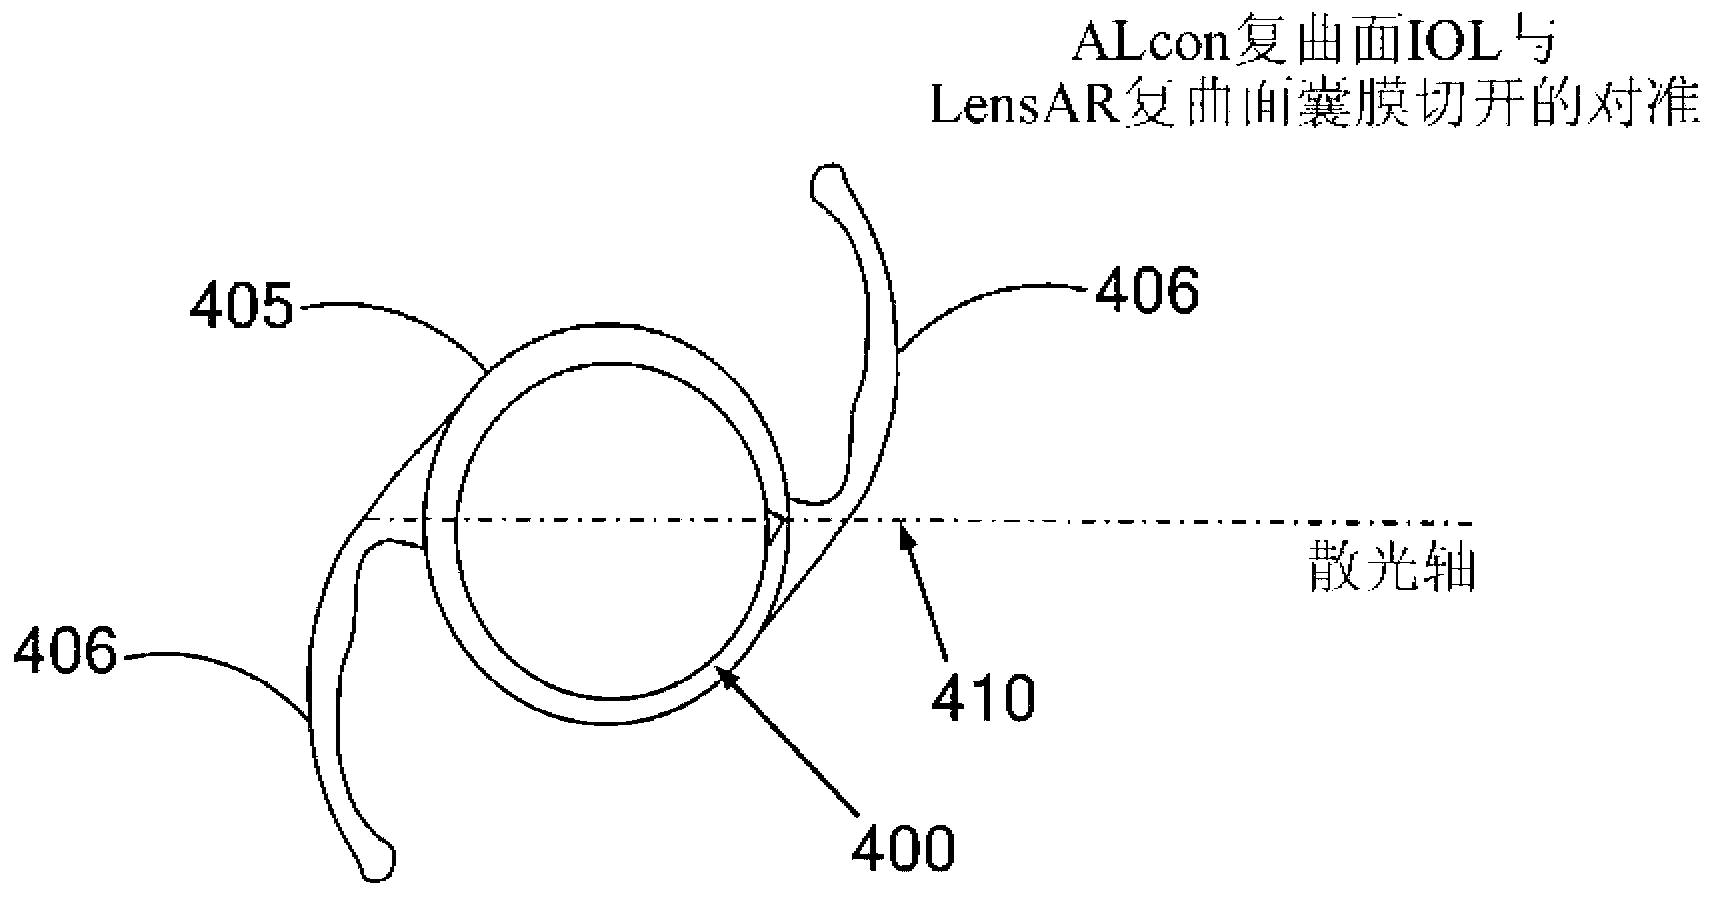 Placido ring measurement of astigmatism axis and laser marking of astigmatism axis